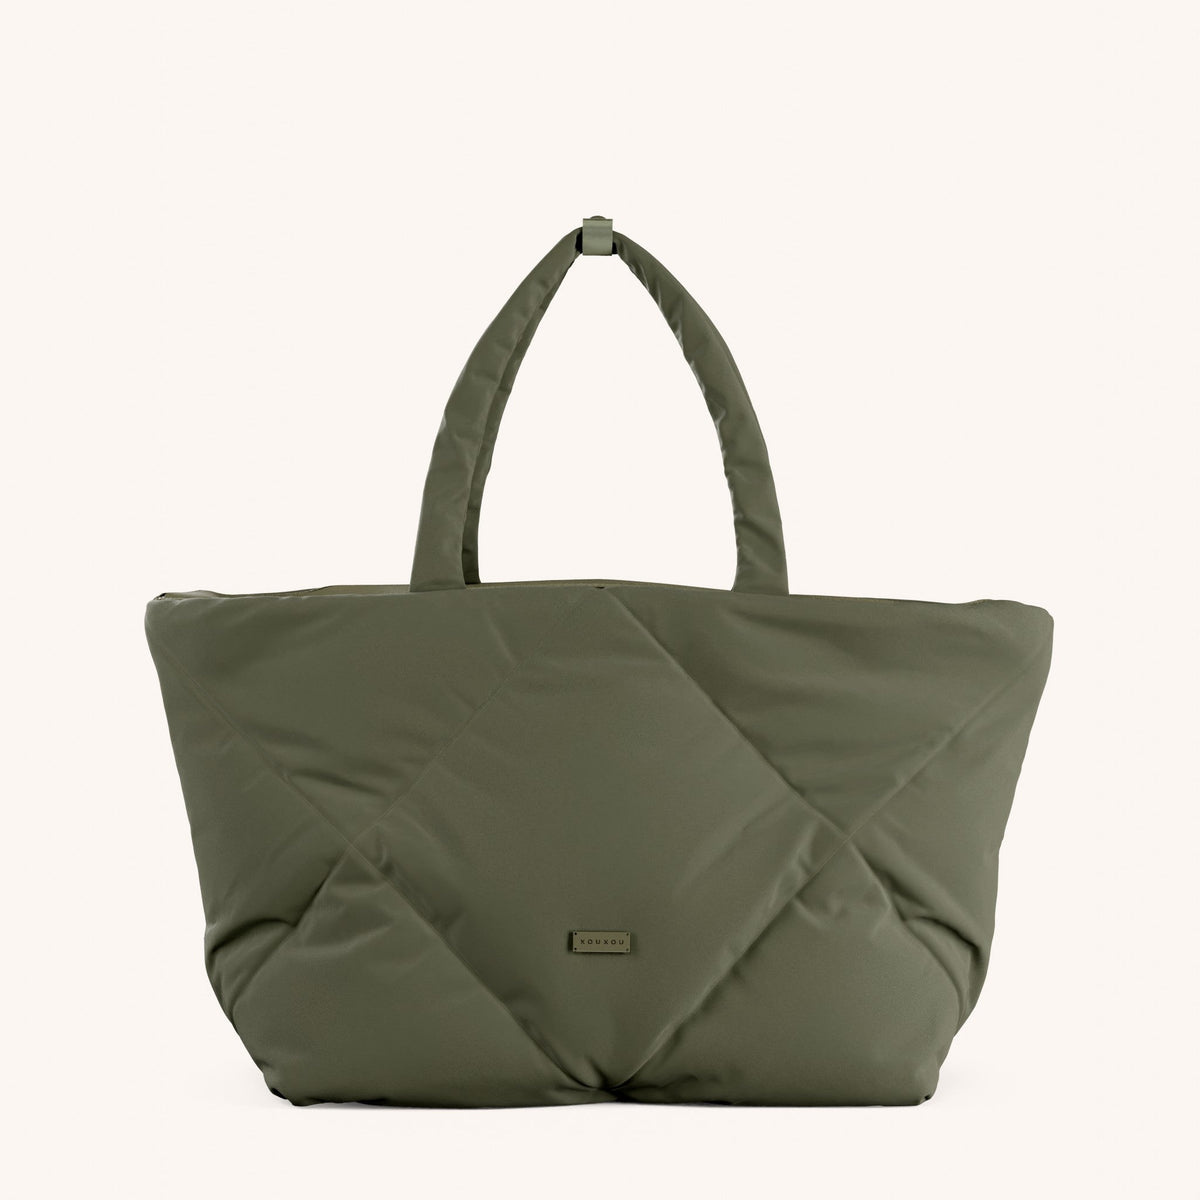 Padded Tote in Moss Total View | XOUXOU